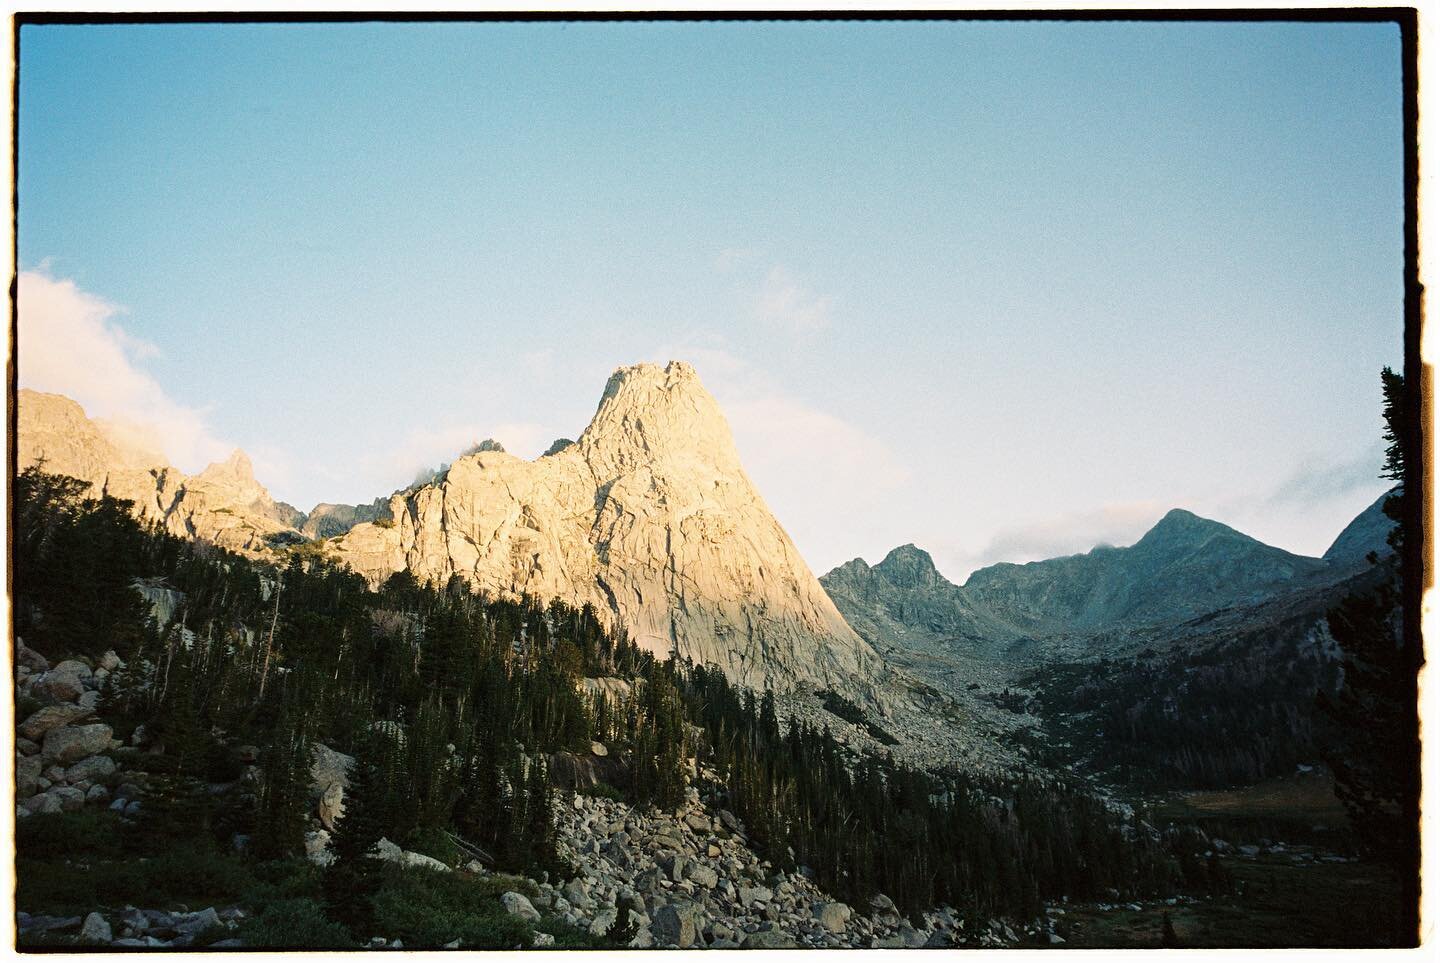 Ready to get back out there and play in some mountains. 

Wind River Range 2020. Voigtlander Bessa R4M. Portra 400.